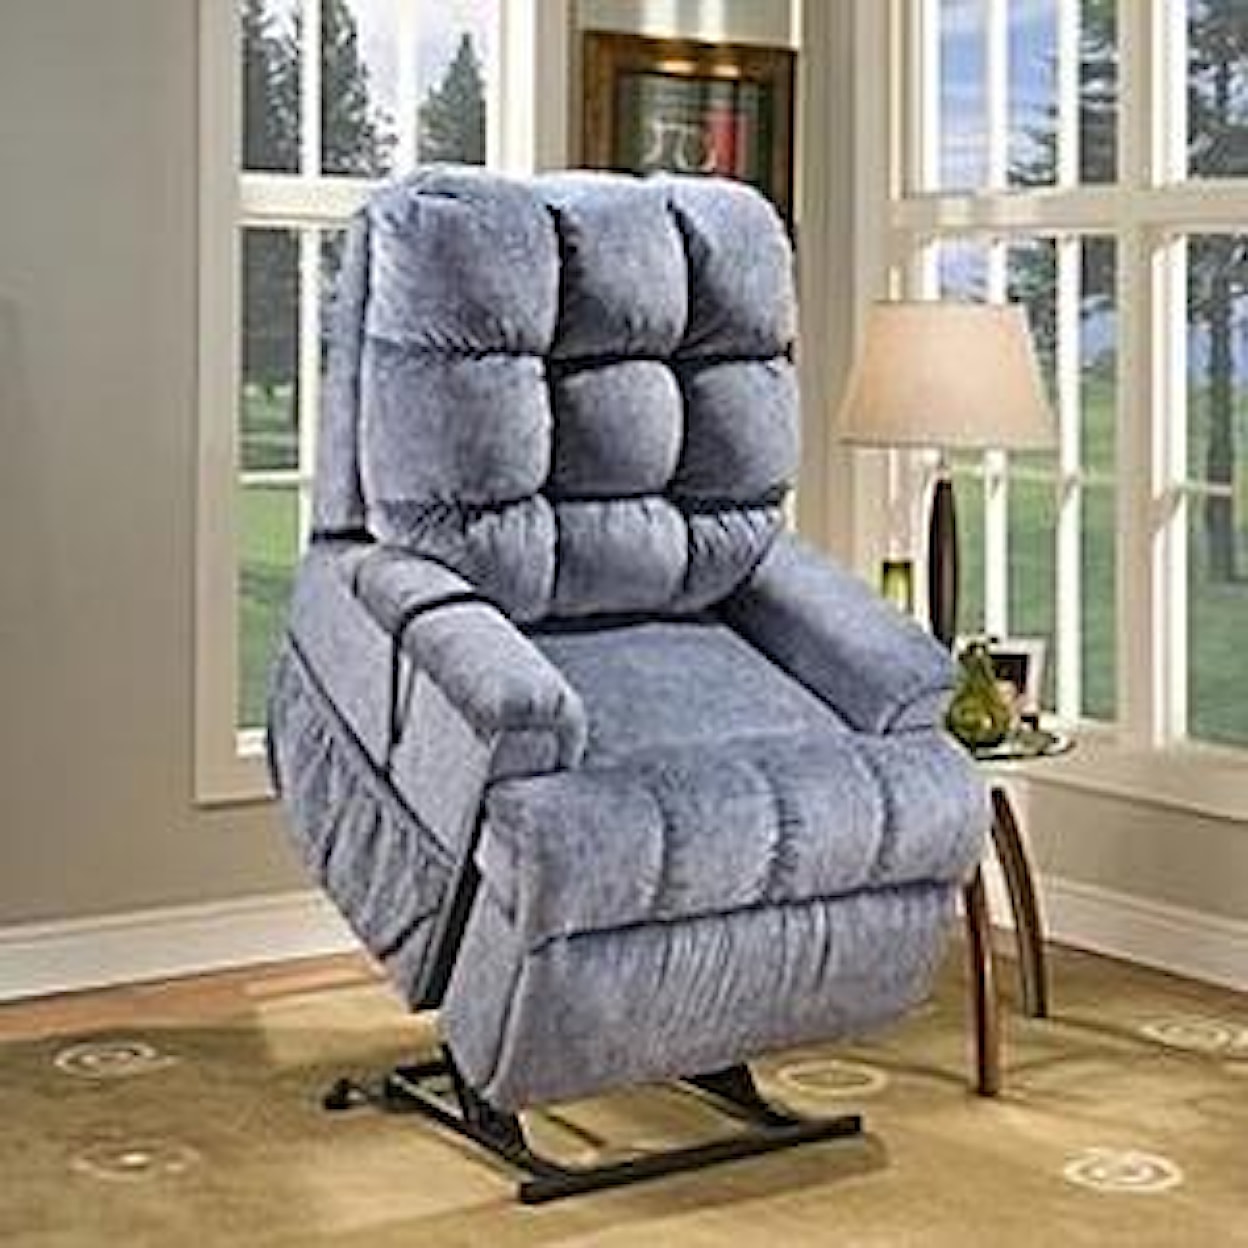 Med-Lift & Mobility 55 Series Lift Recliner